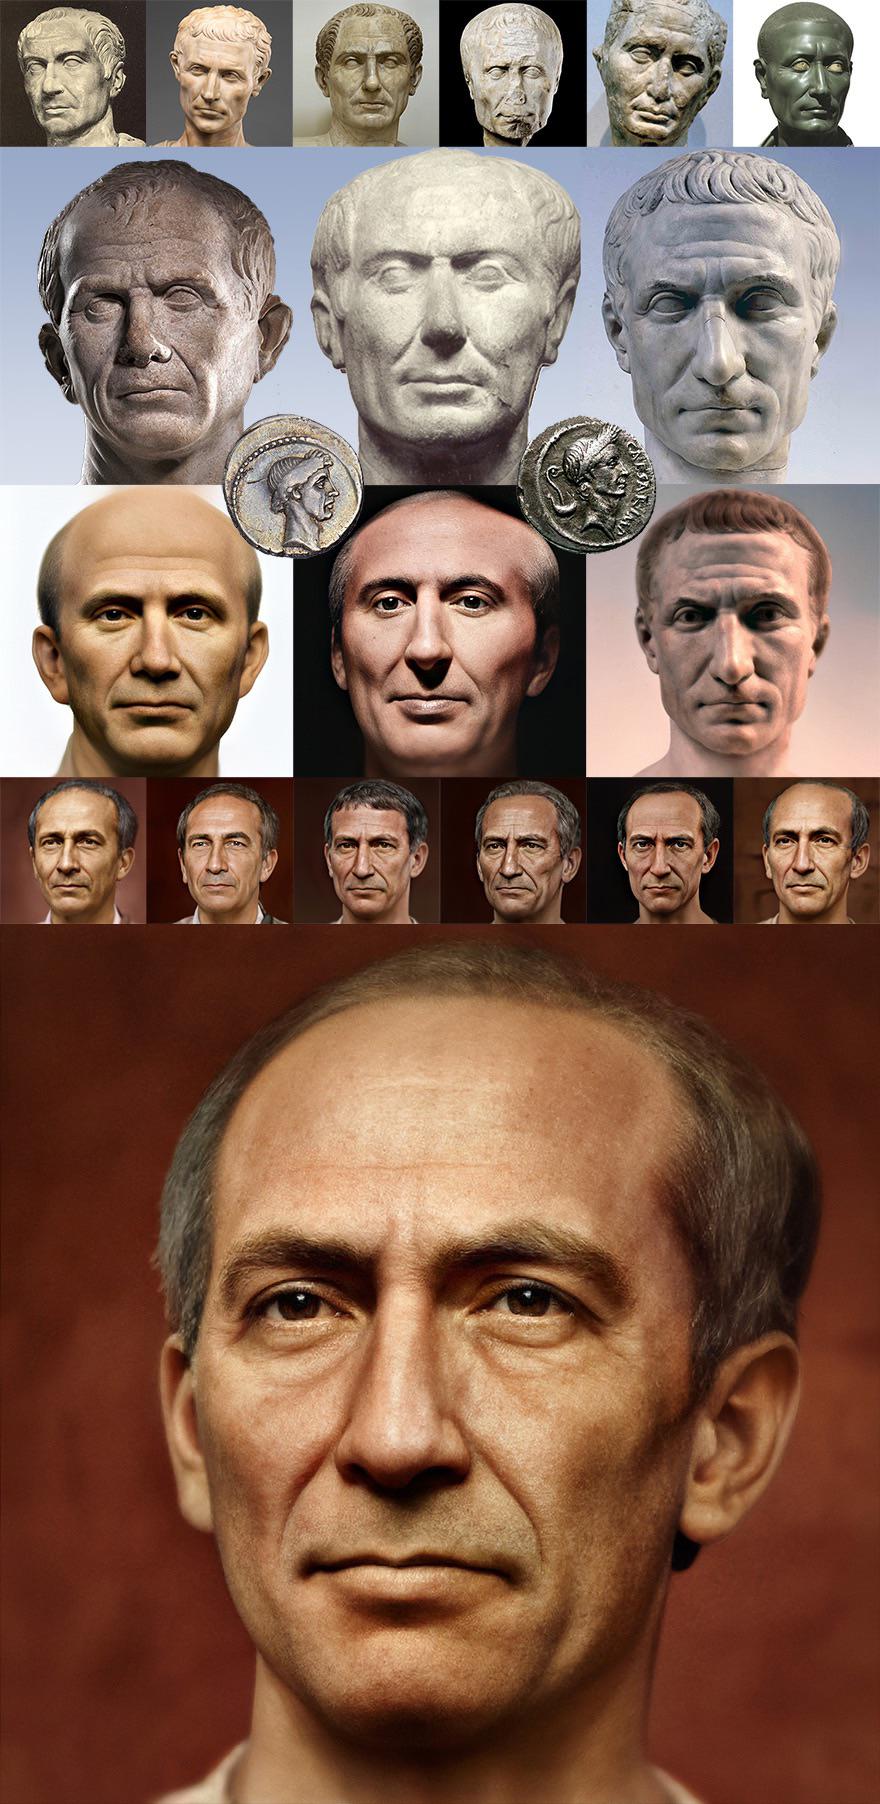 Digital reconstruction of Julius Caesar, based on a number of sculptures, mainly using the Tusculum, Chiaramonti and Arles busts. By Bas Uterwijk.jpg